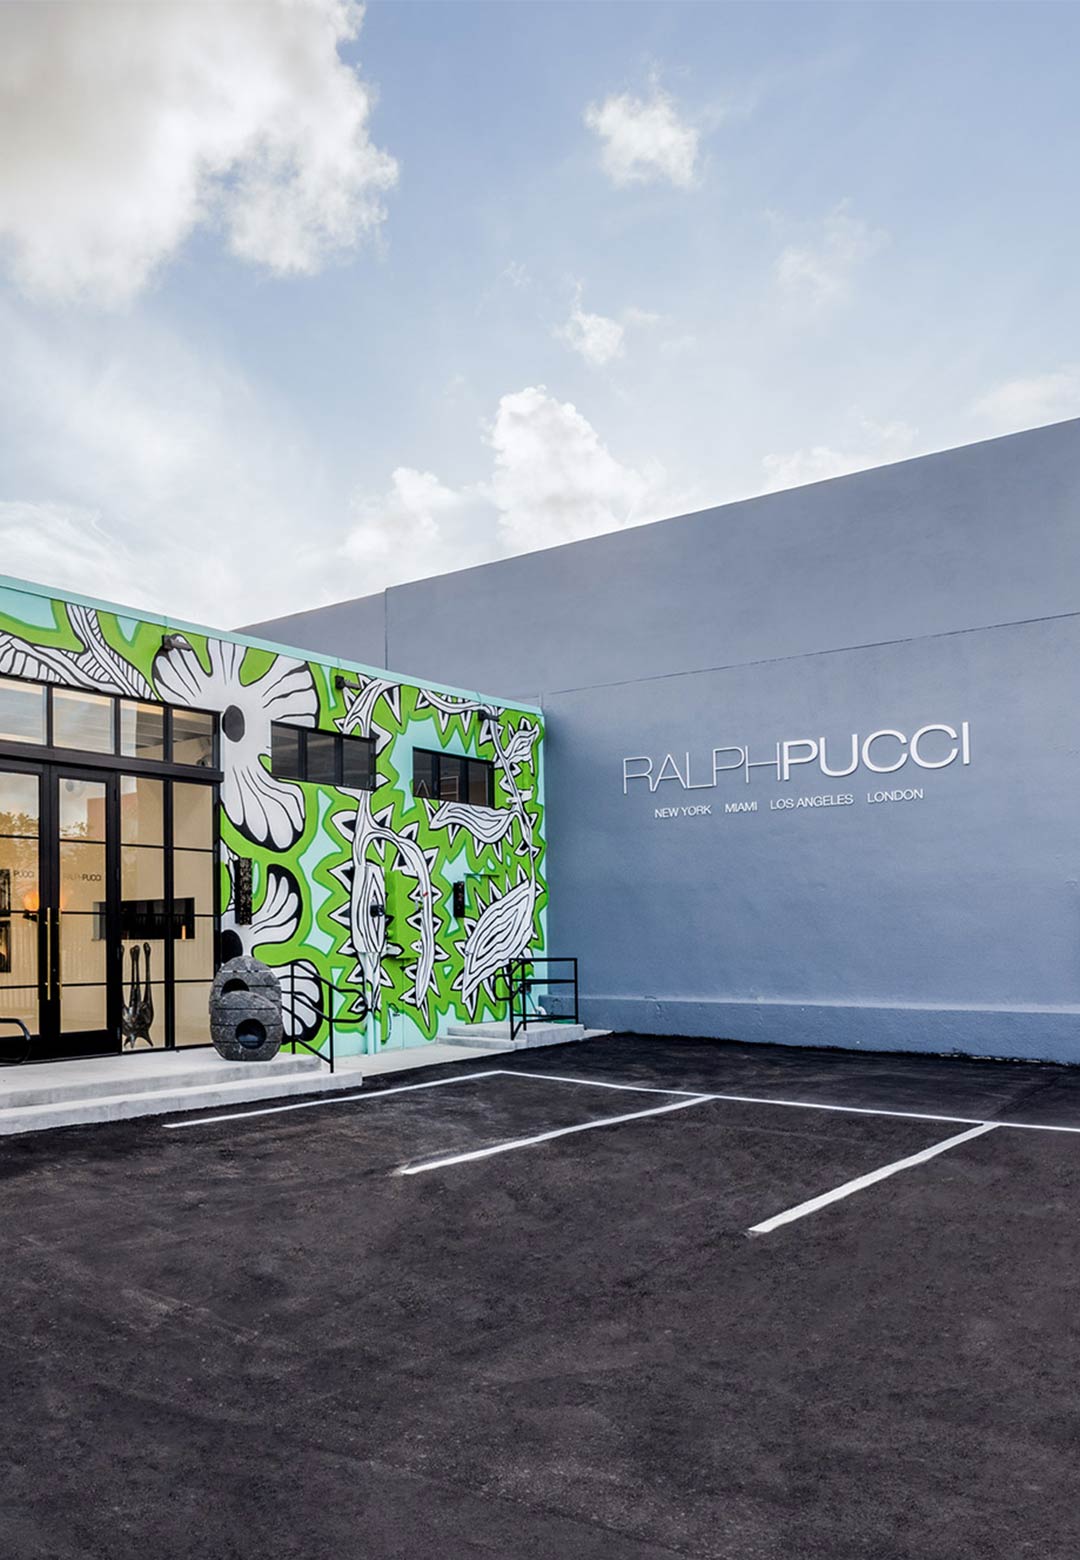 Ralph Pucci’s new gallery in Miami is a design haven fusing luxury art and design